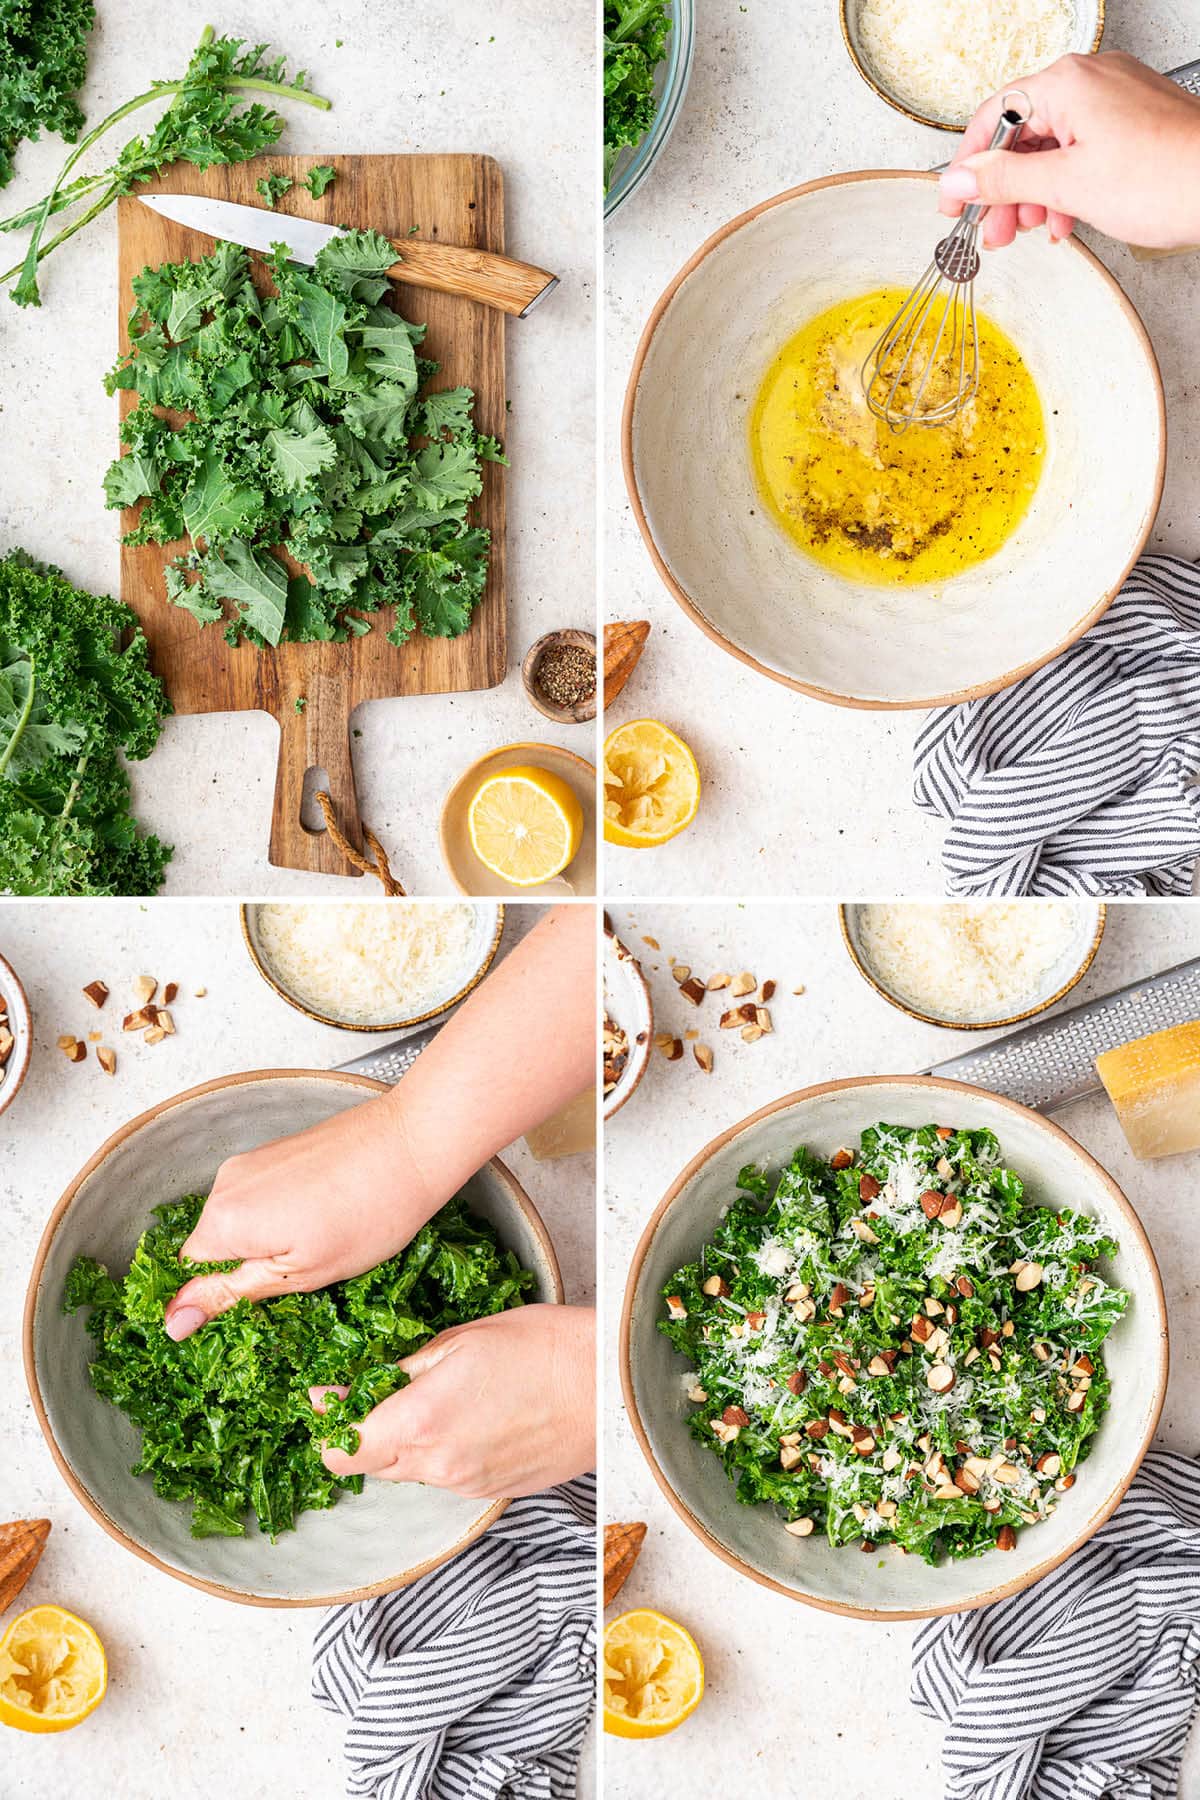 Four photos showing the steps to make Easy Kale Salad: chopping the kale, whisking together a dressing, massaging the kale with dressing and then adding toppings.